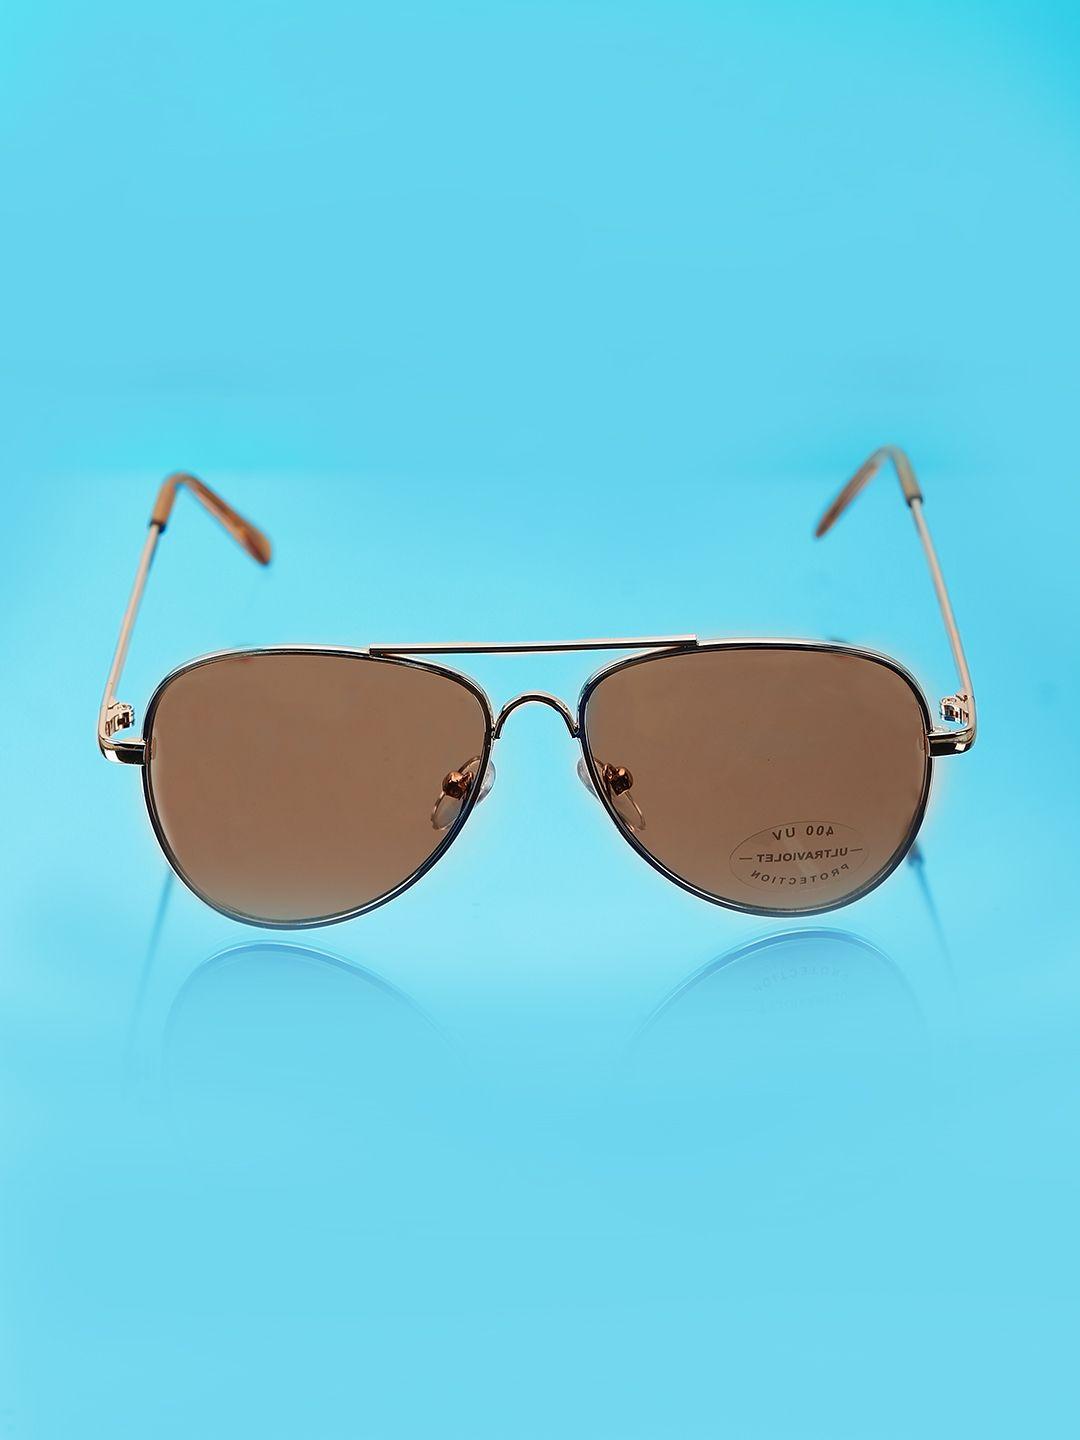 carlton london boys brown lens & gold-toned aviator sunglasses with uv protected lens